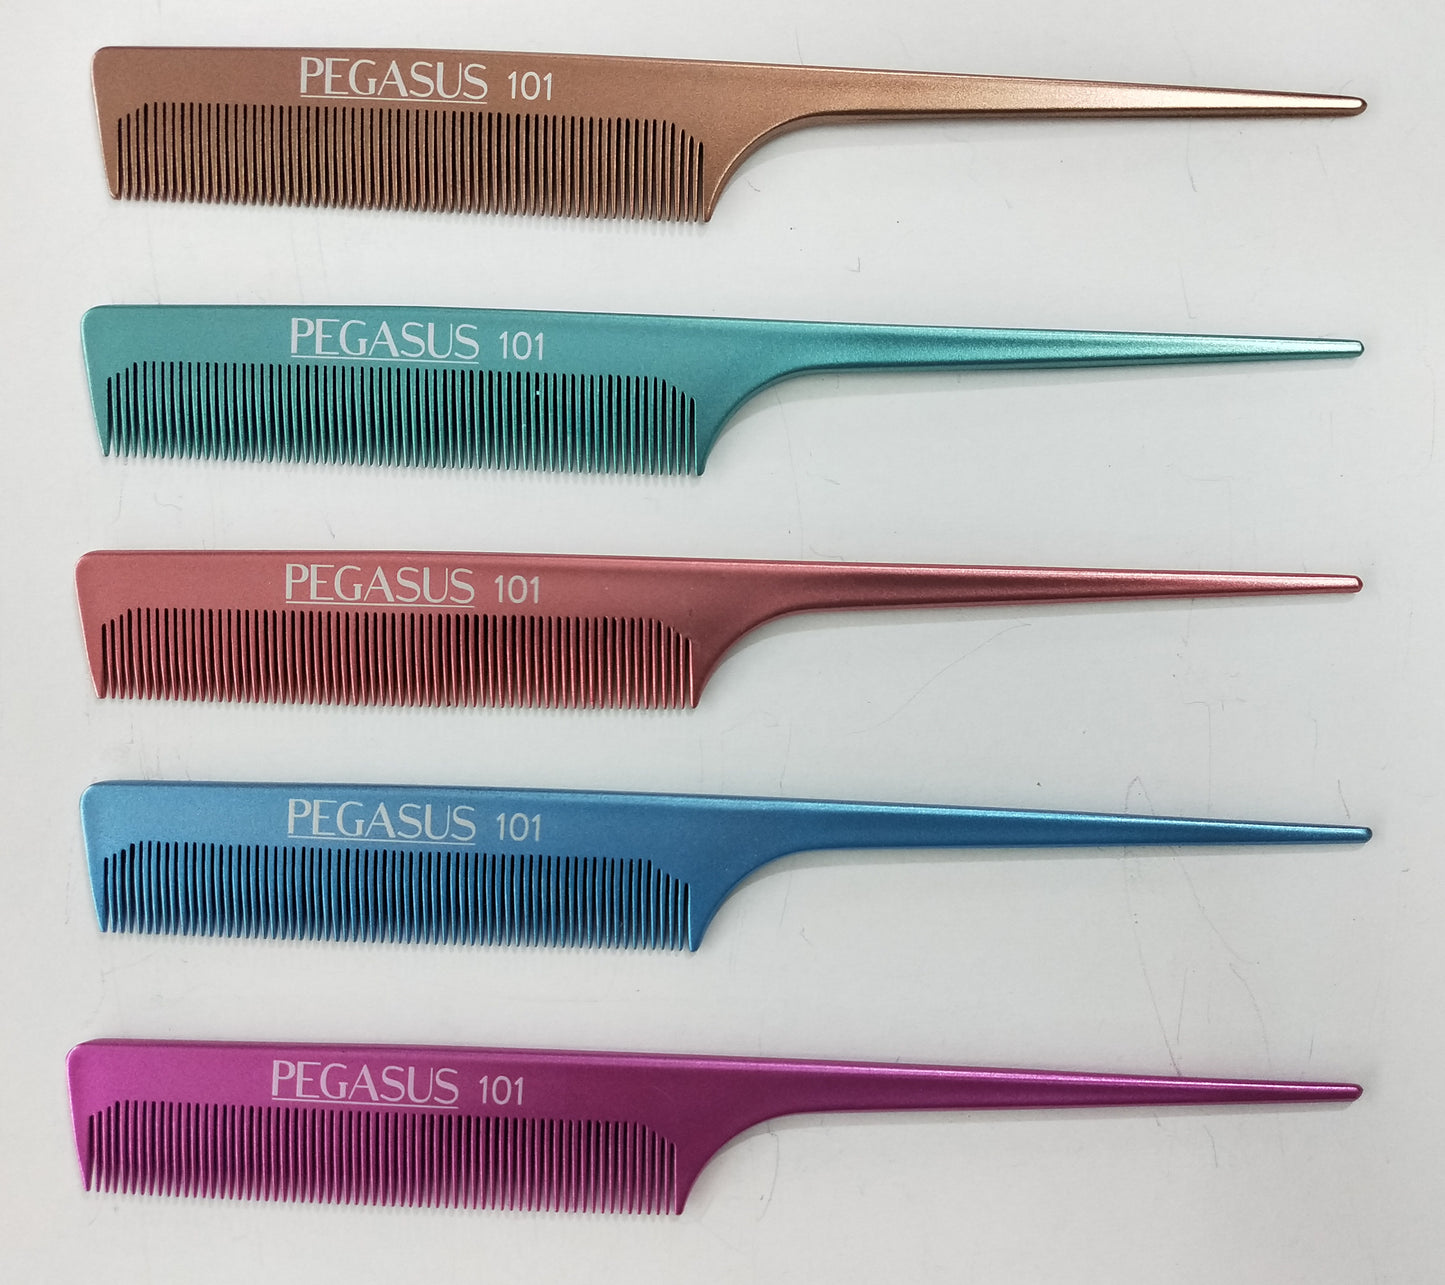 Pegasus MICOLOR 101, 8in Hard Rubber Fine Tooth Rat Tail Comb, Handmade, Seamless, Smooth Edges, Anti Static, Heat and Chemically Resistant, Great for Parting, Coloring Hair | Peines de goma dura - Green